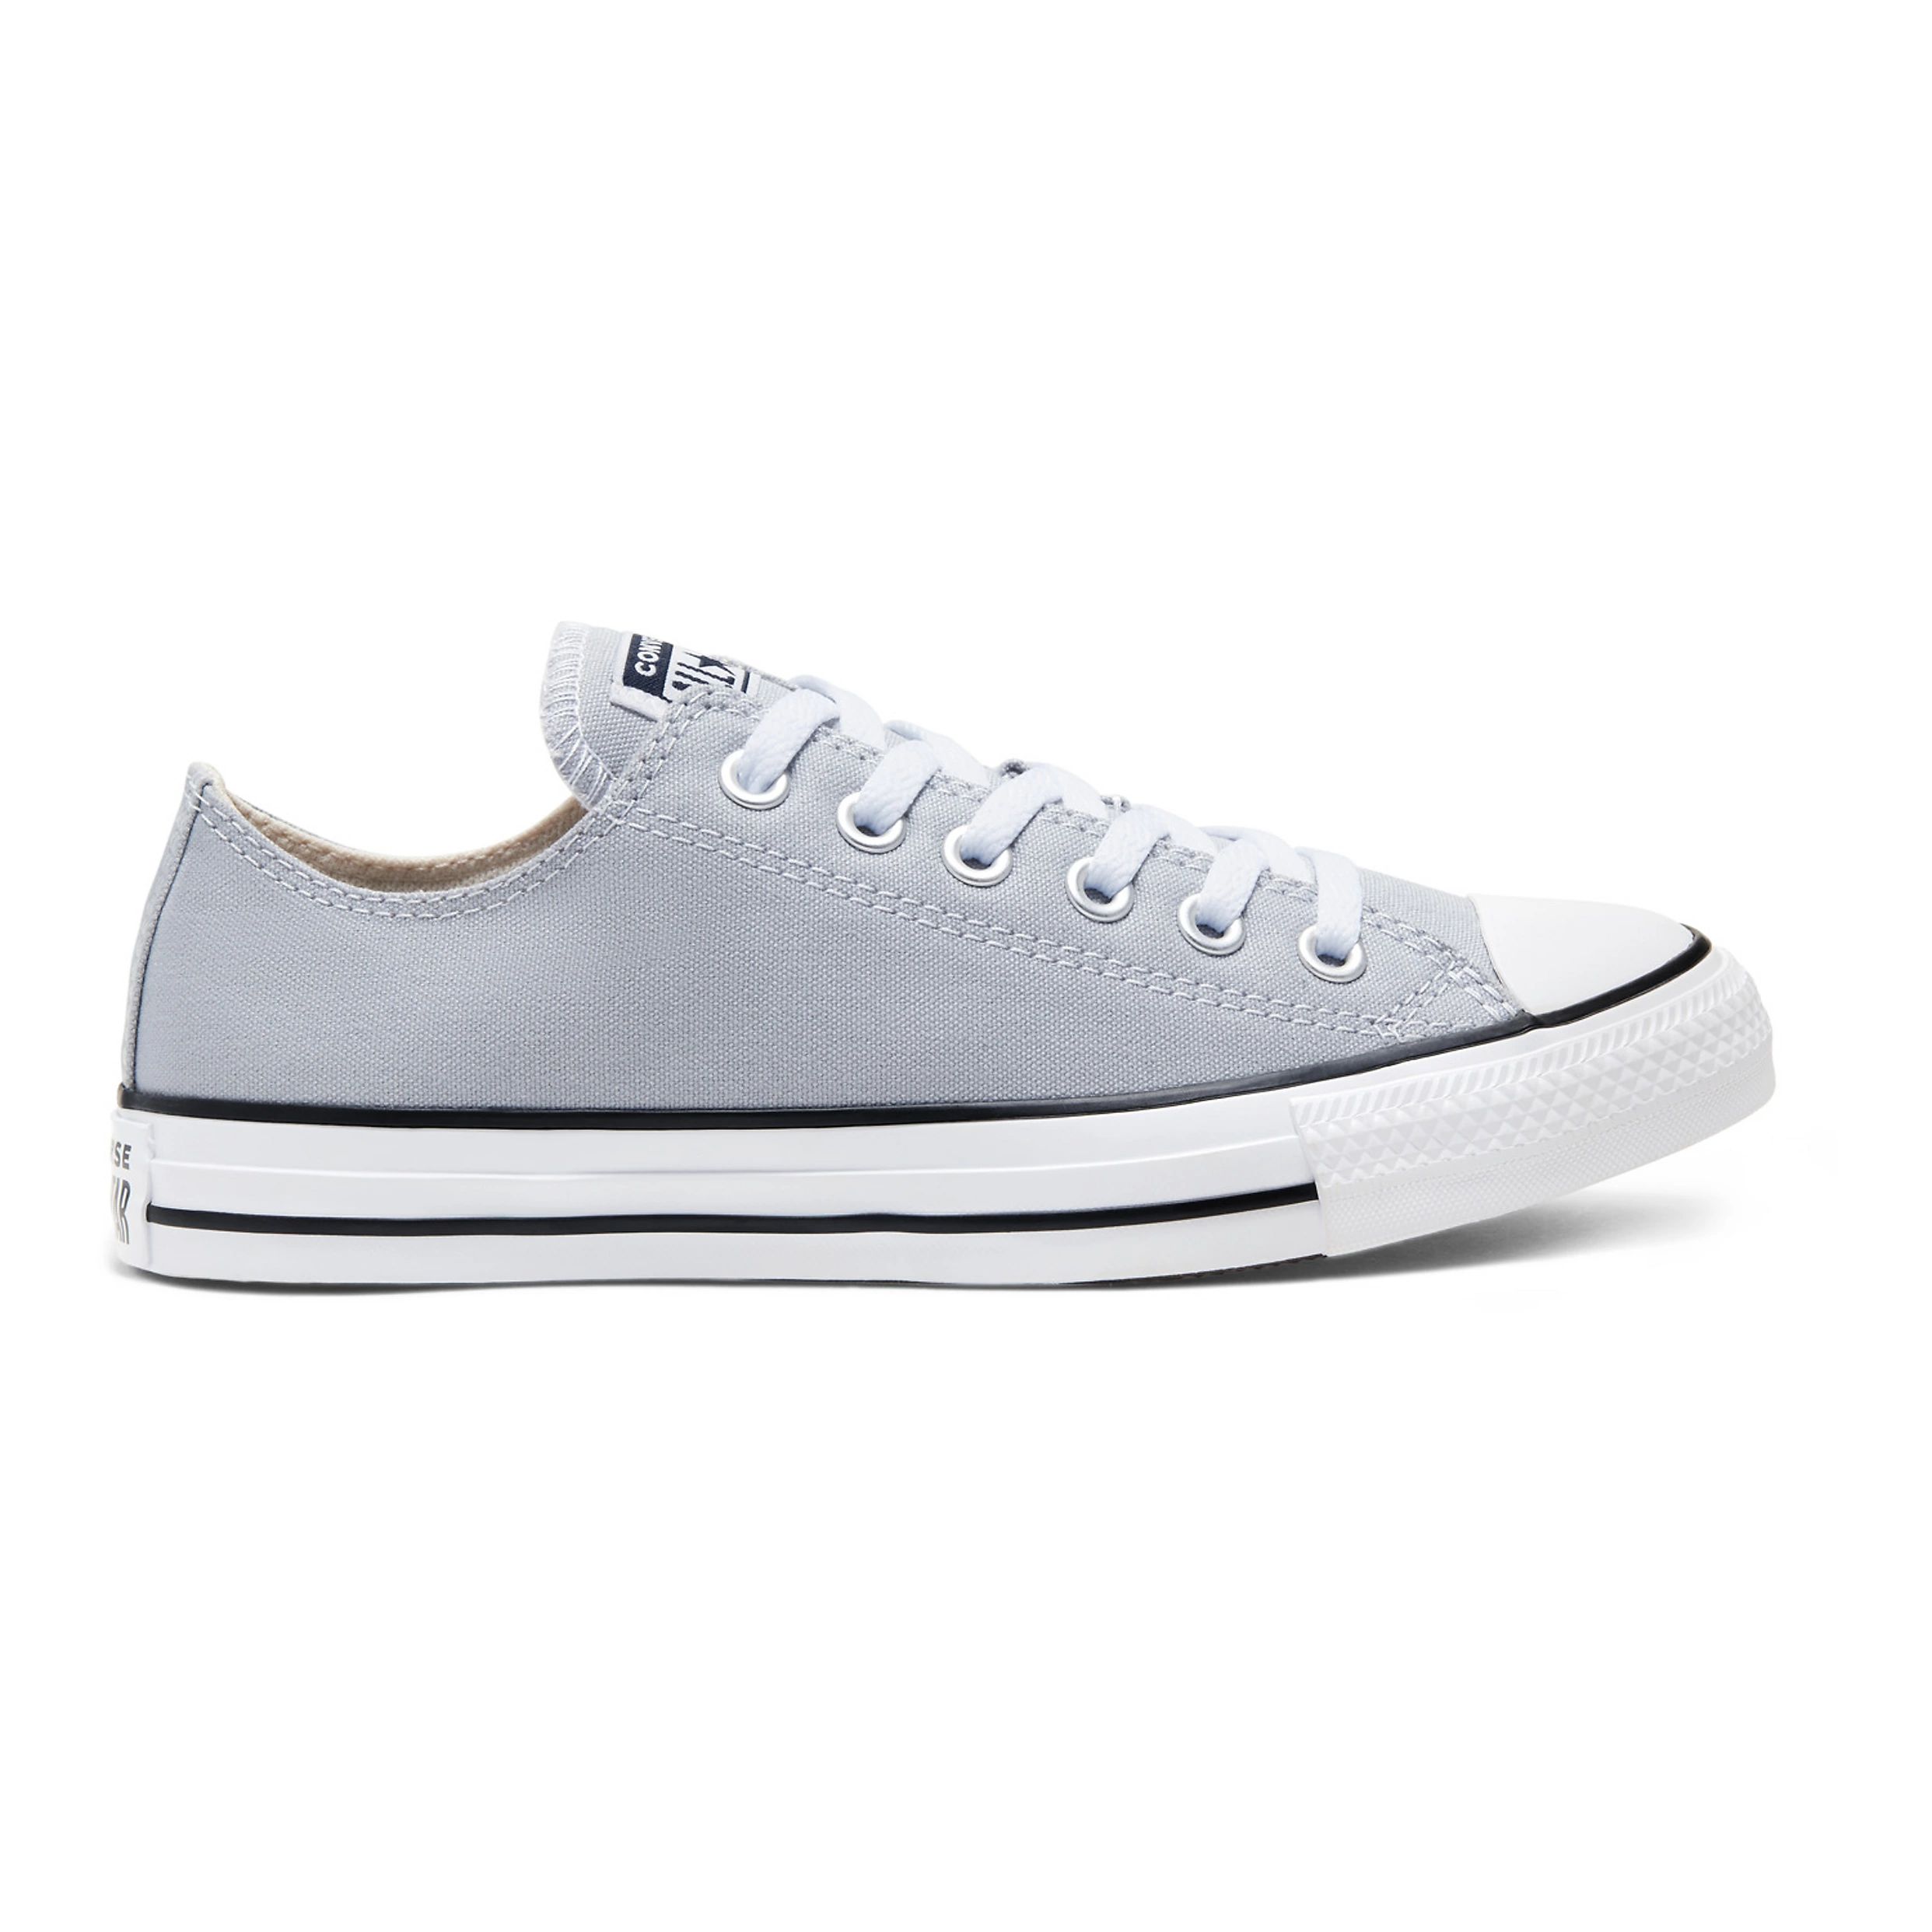 Women's Converse Chuck Taylor All Star Sneakers | Kohl's